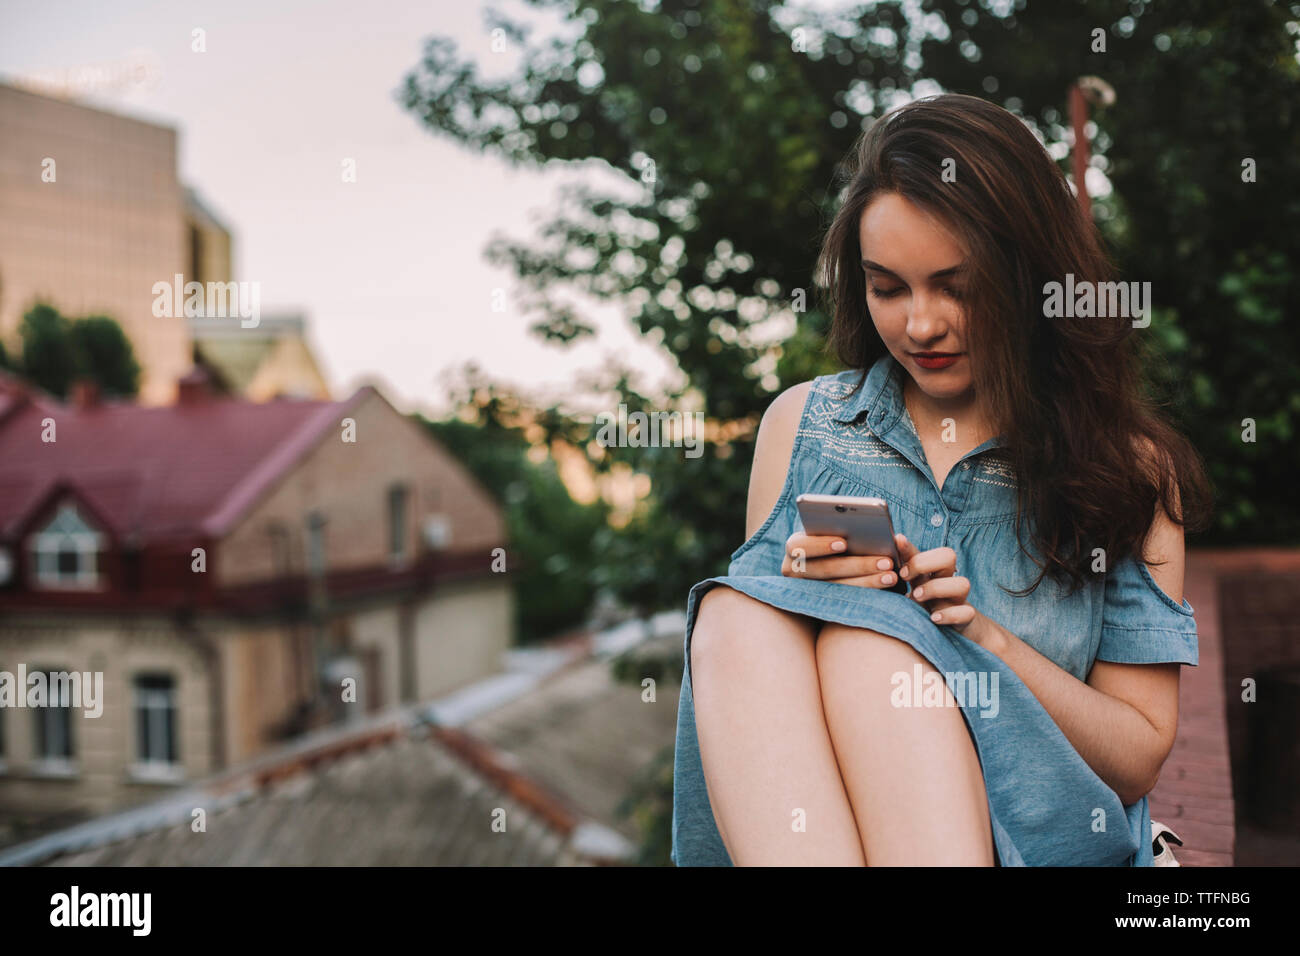 Young woman using smart phone while sitting on retaining wall in city Stock Photo